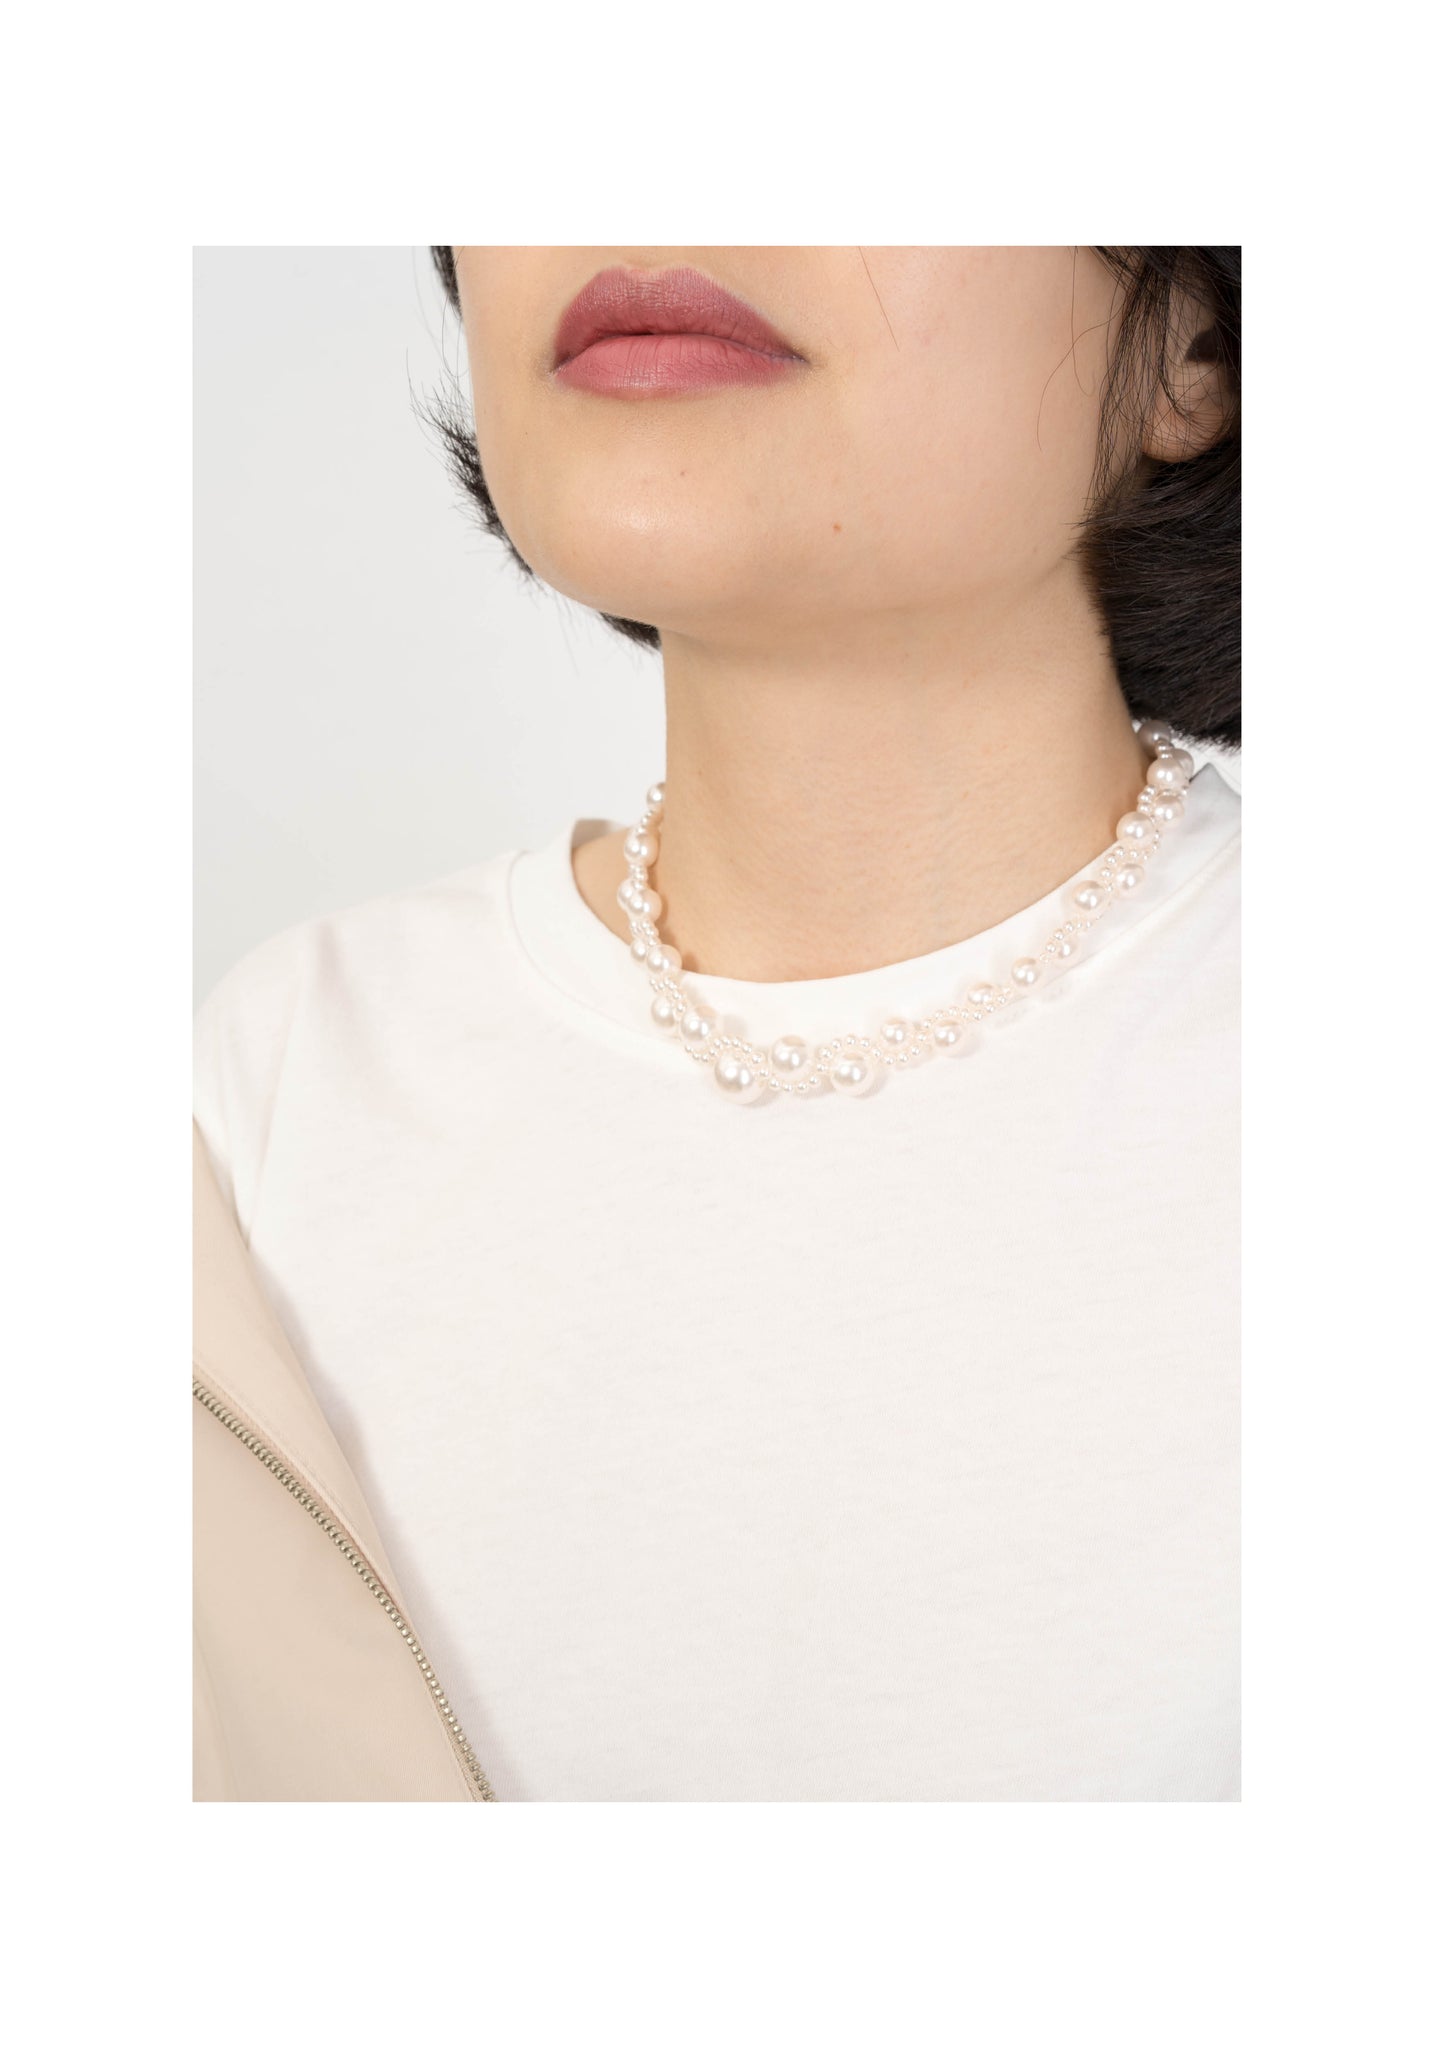 Wavy Faux Pearl Necklace - whoami